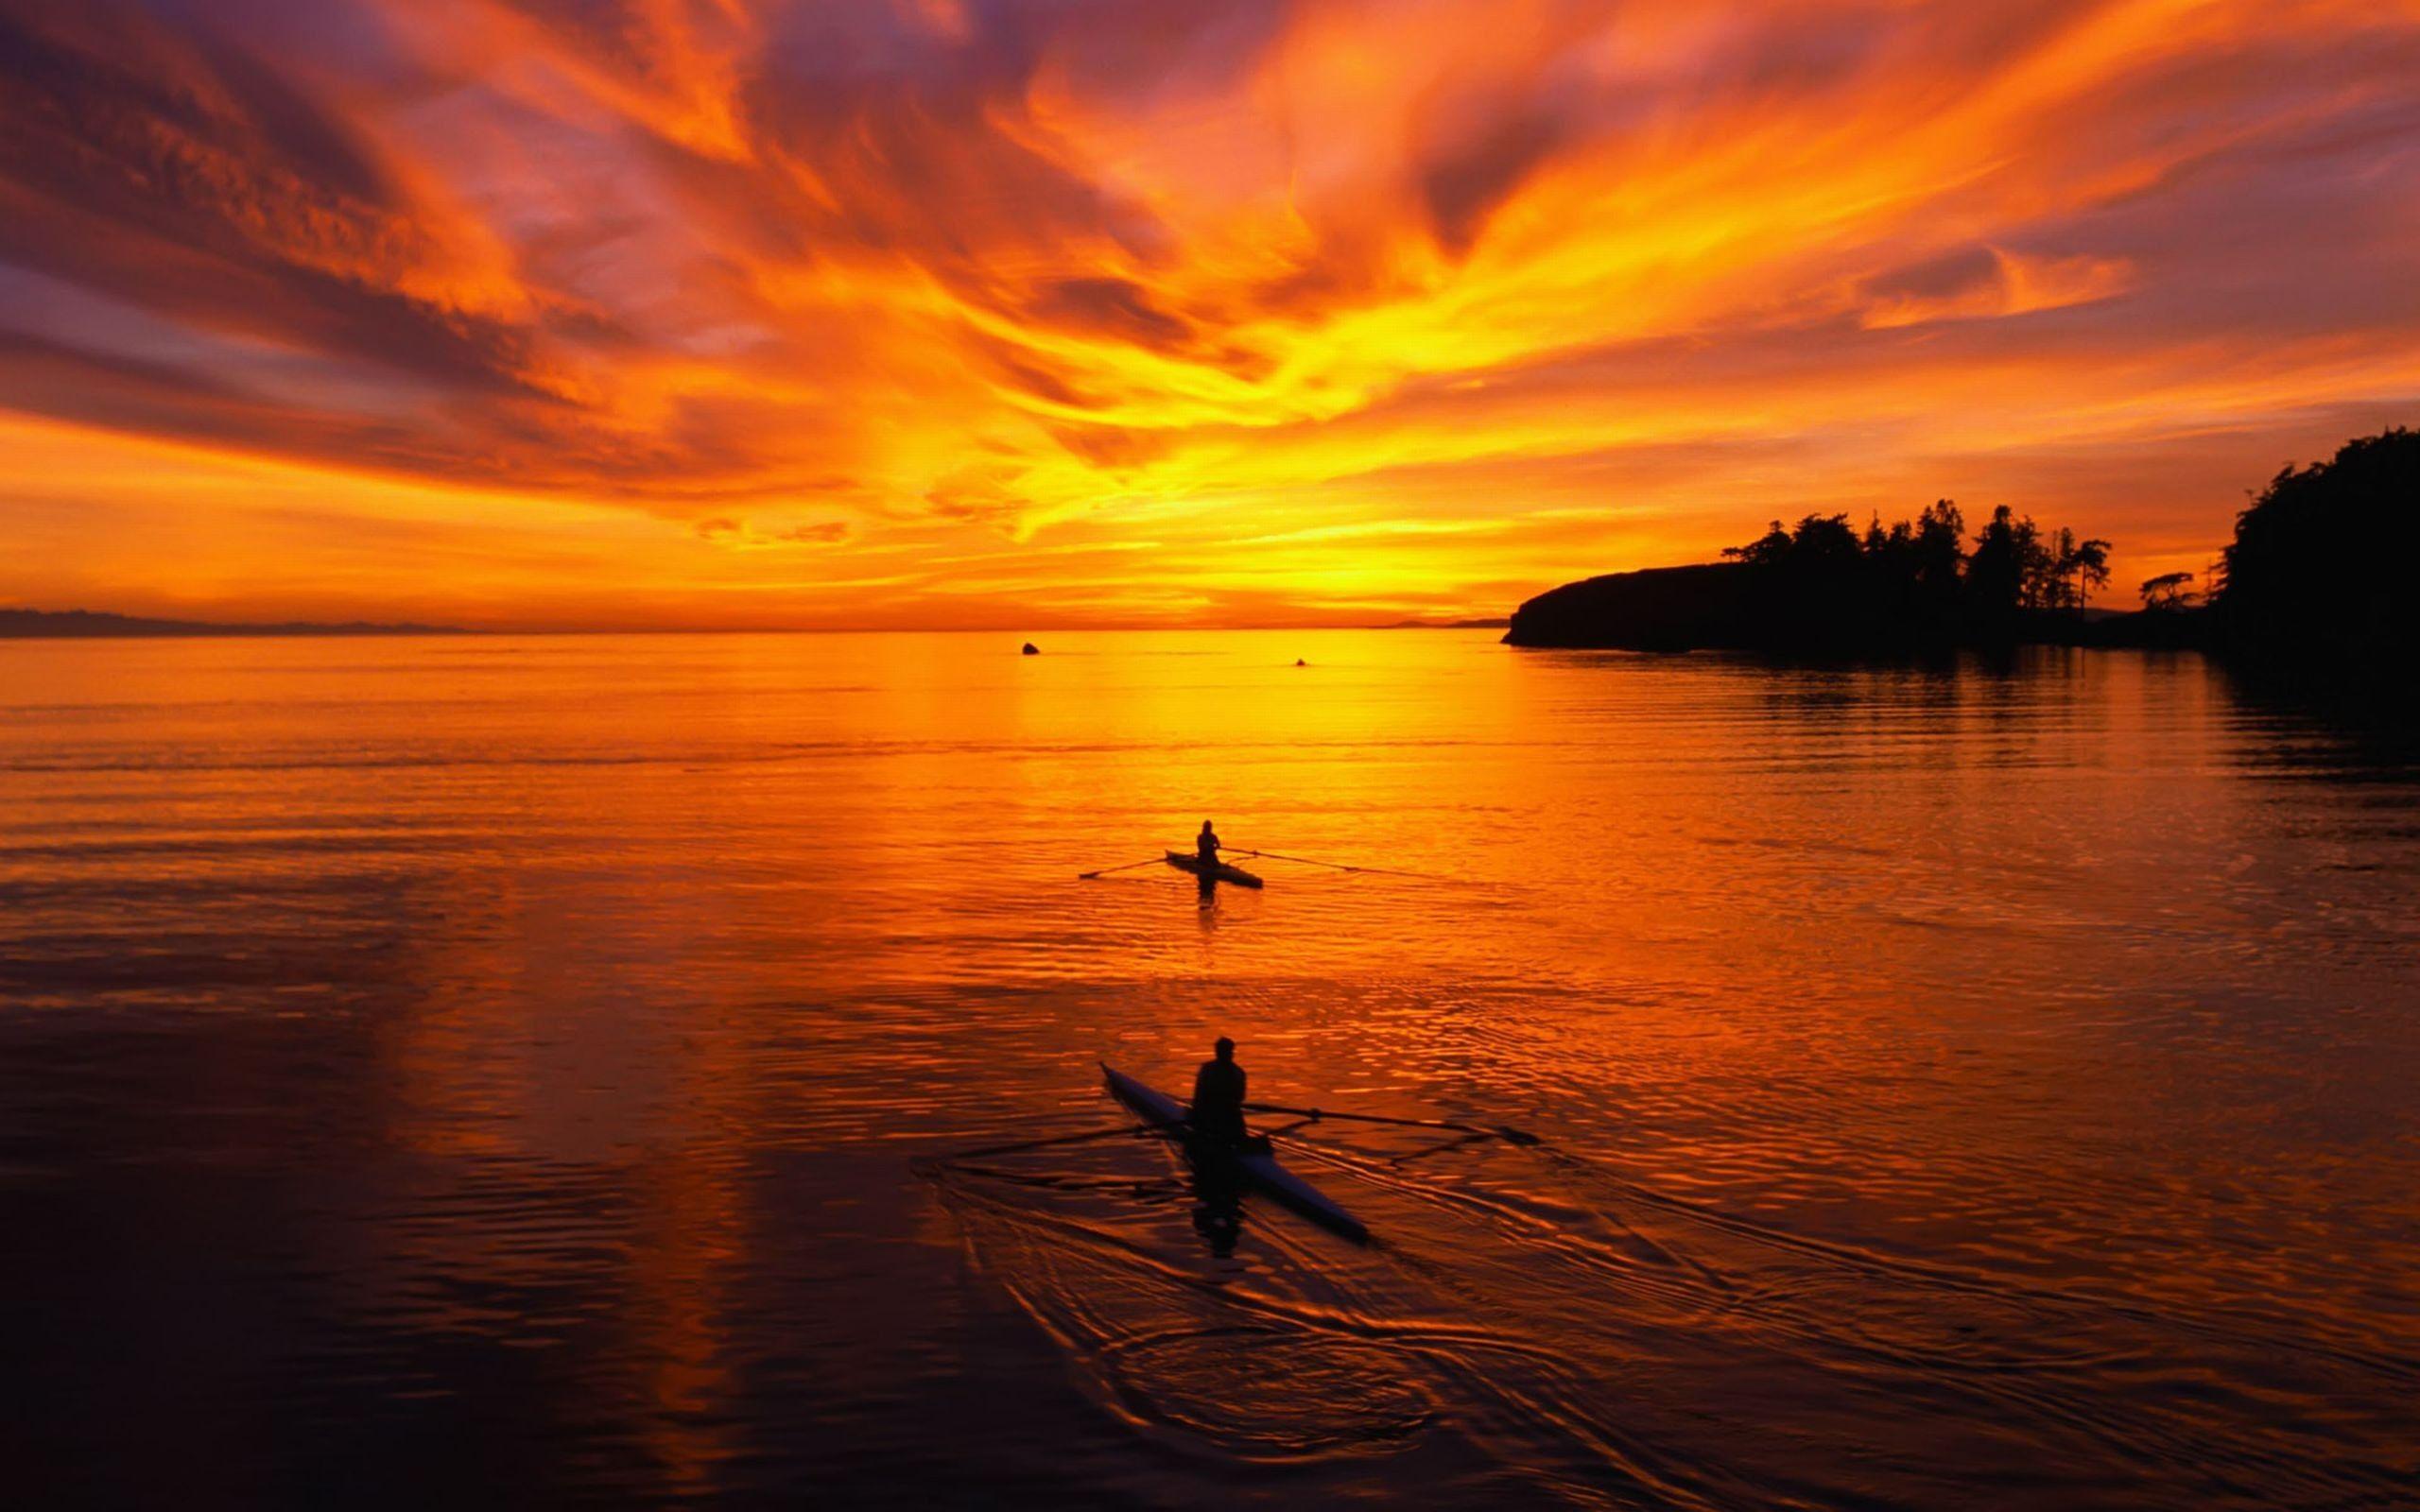 Charming Sunset. The Beauty of Nature. Kayaking